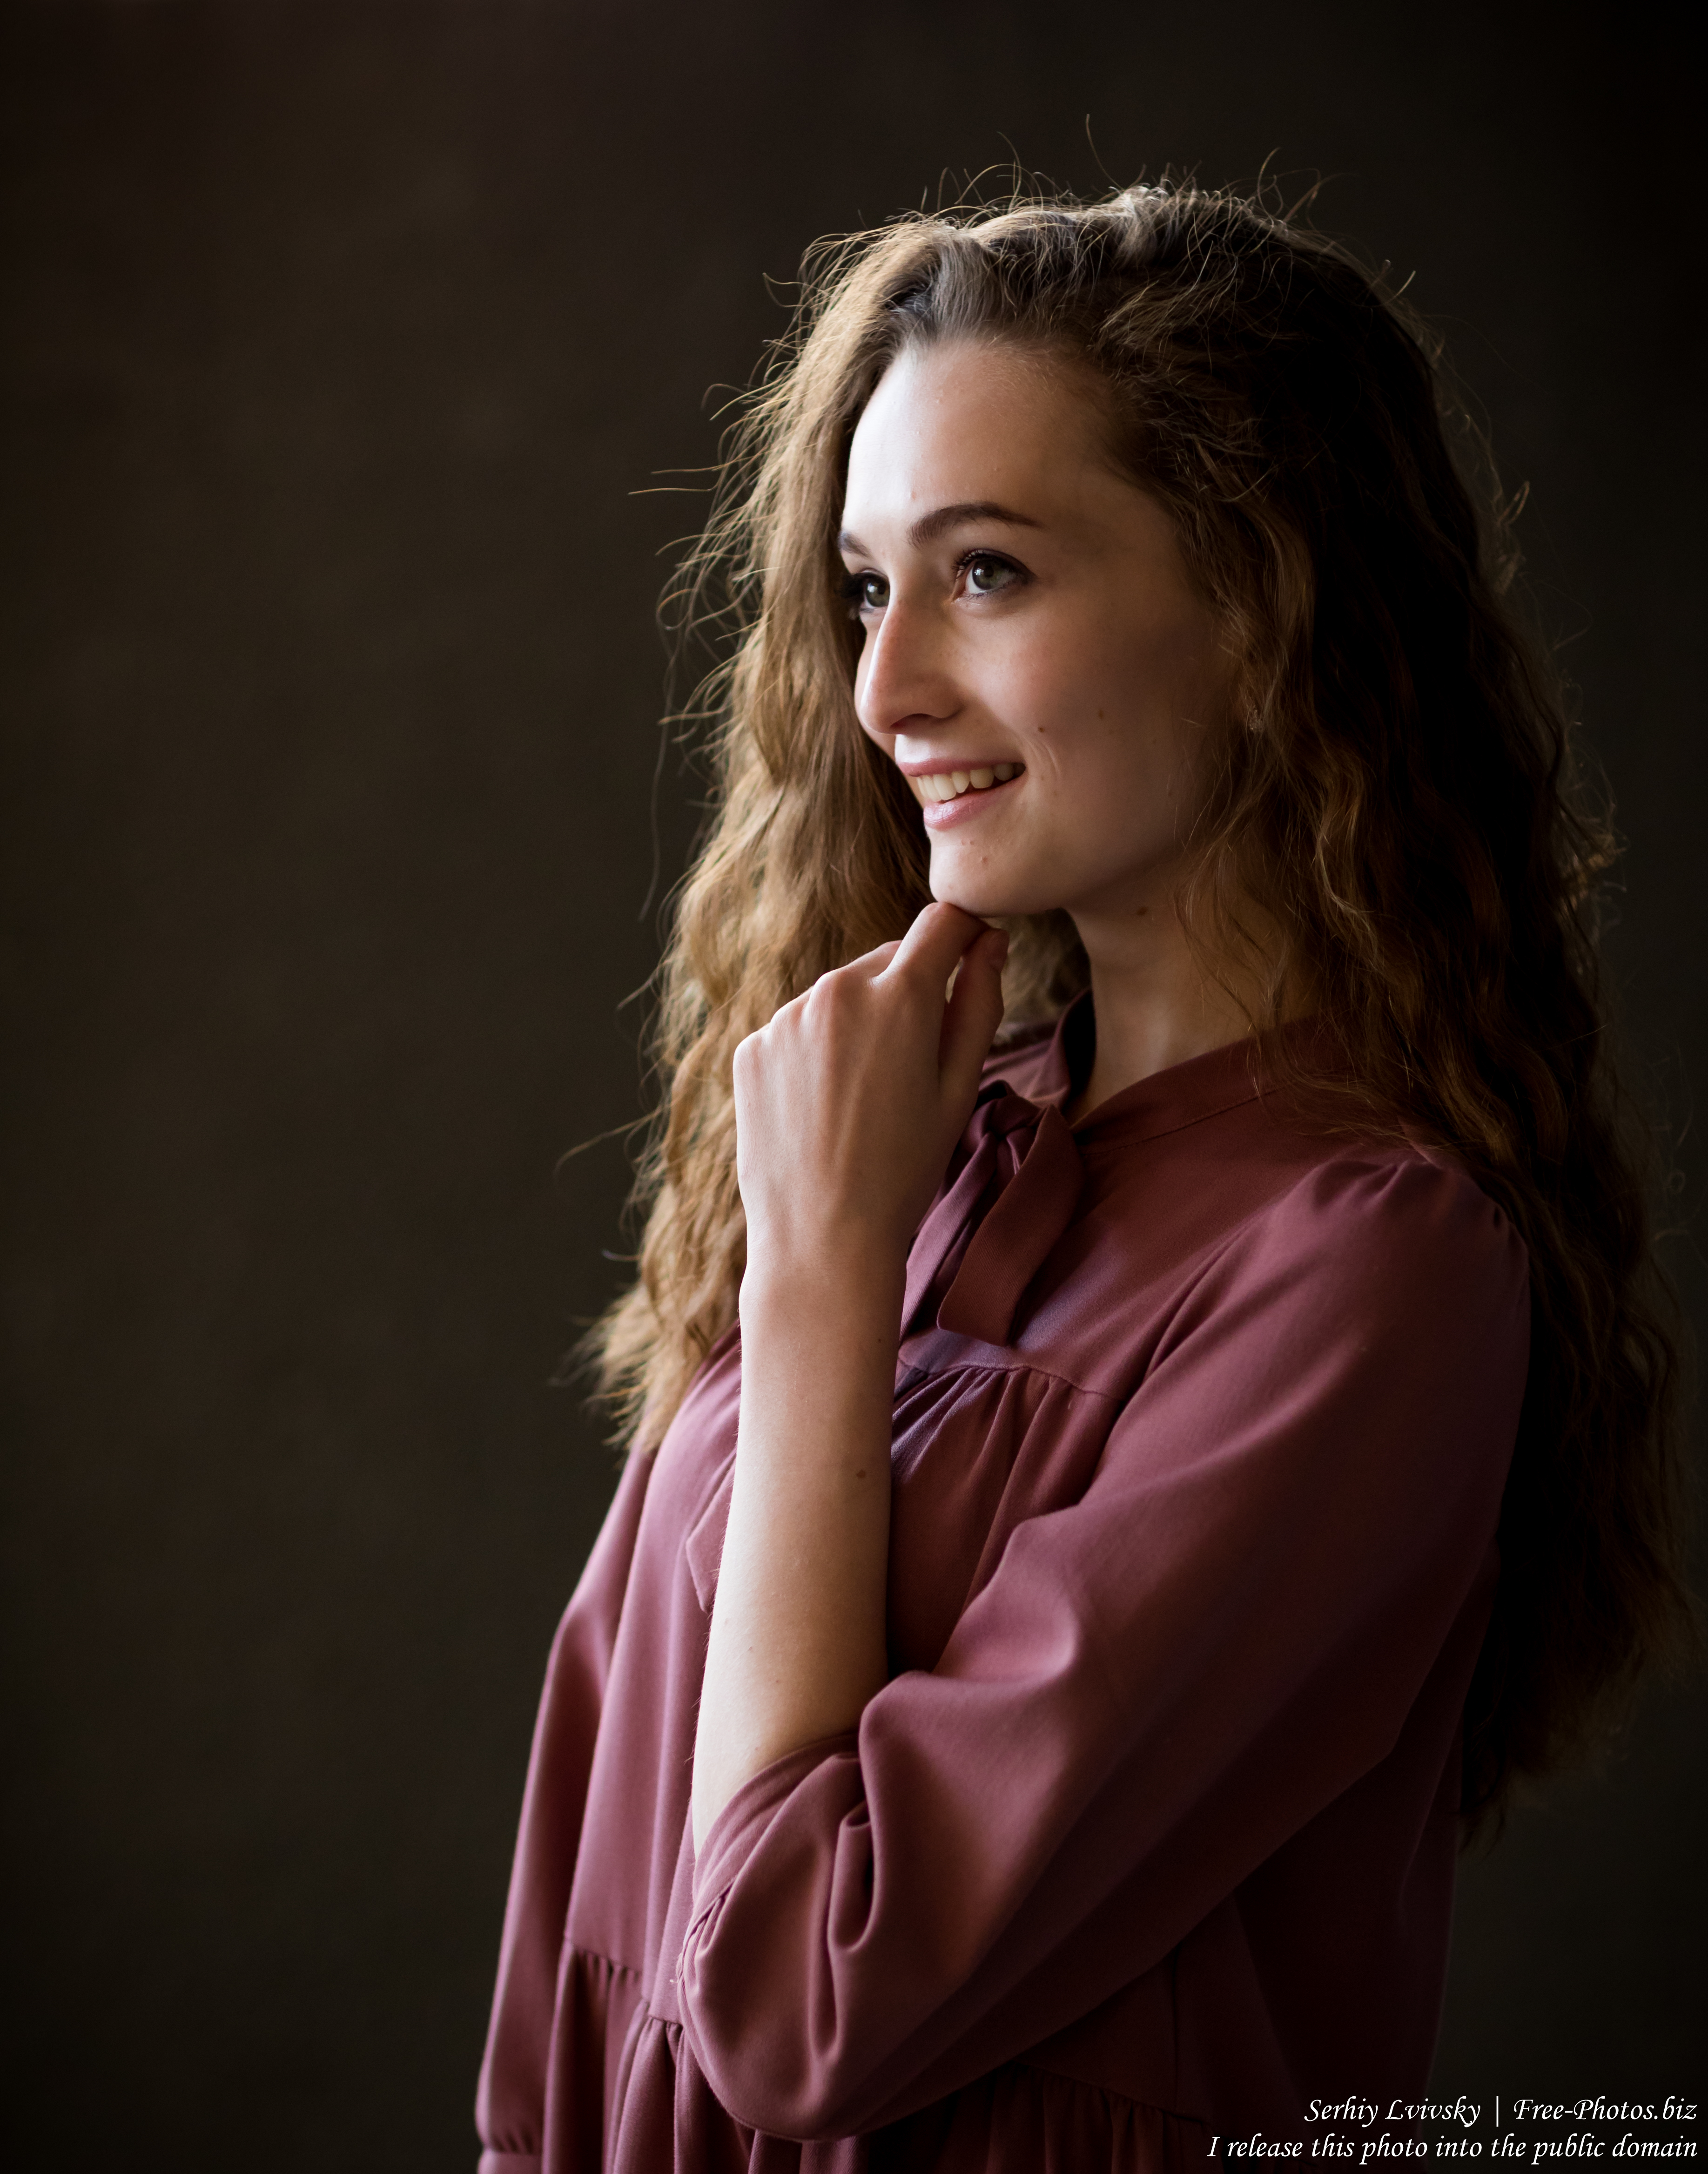 Sophia - a 17-year-old girl photographed in July 2019 by Serhiy Lvivsky, picture 10